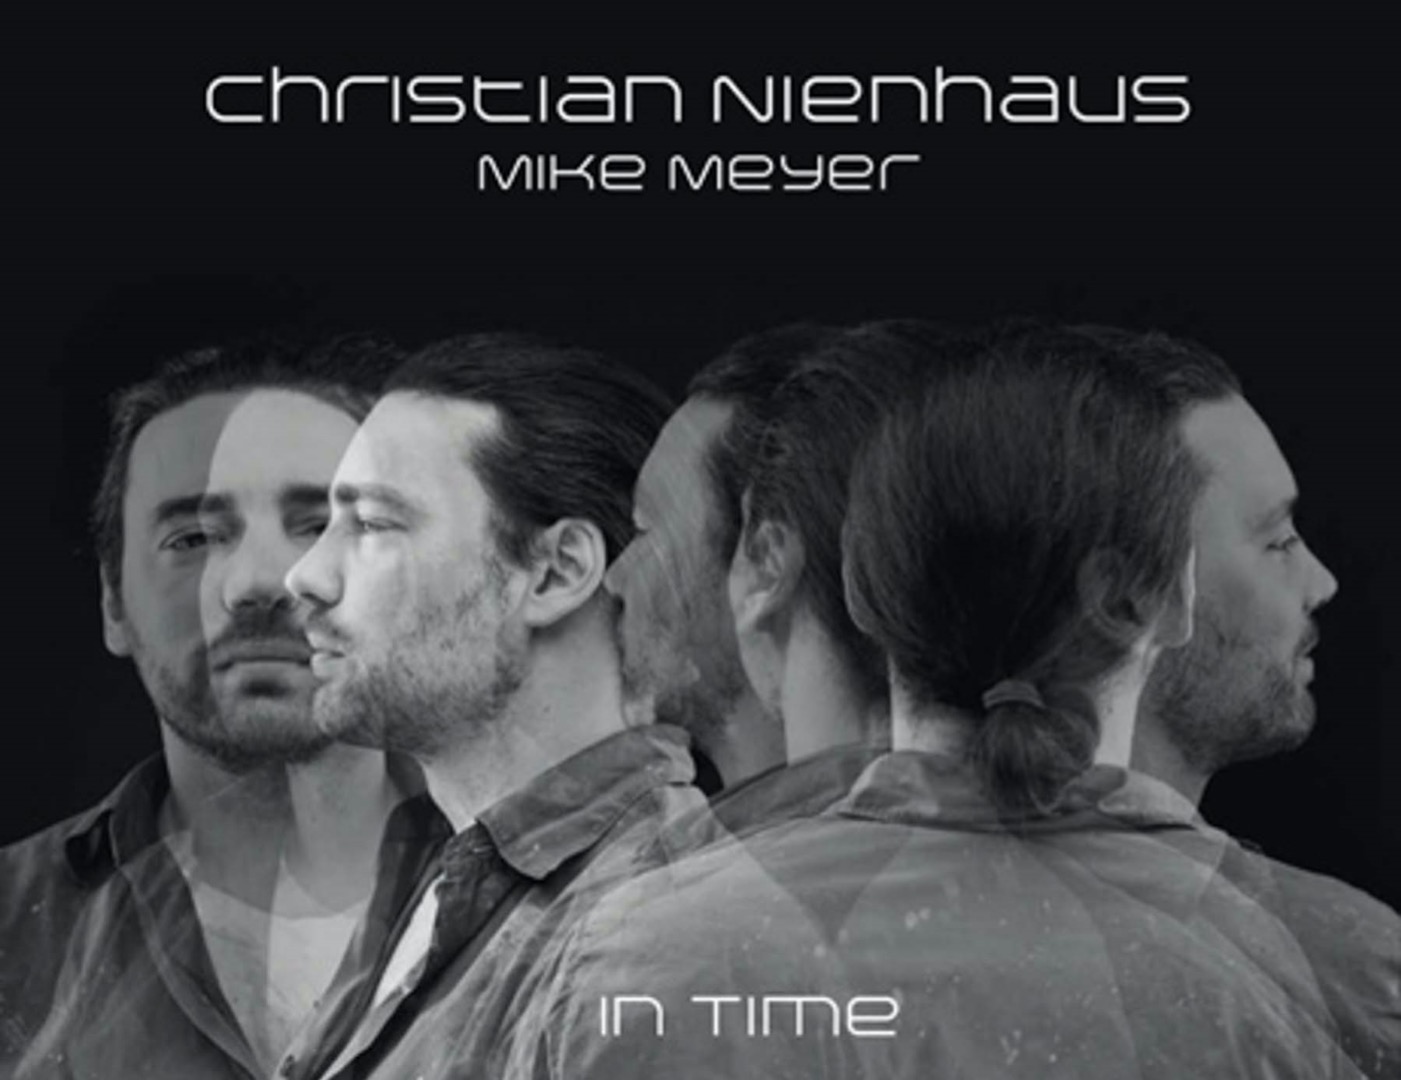 CHRISTIAN NIENHAUS MIKE MEYER IN TIME